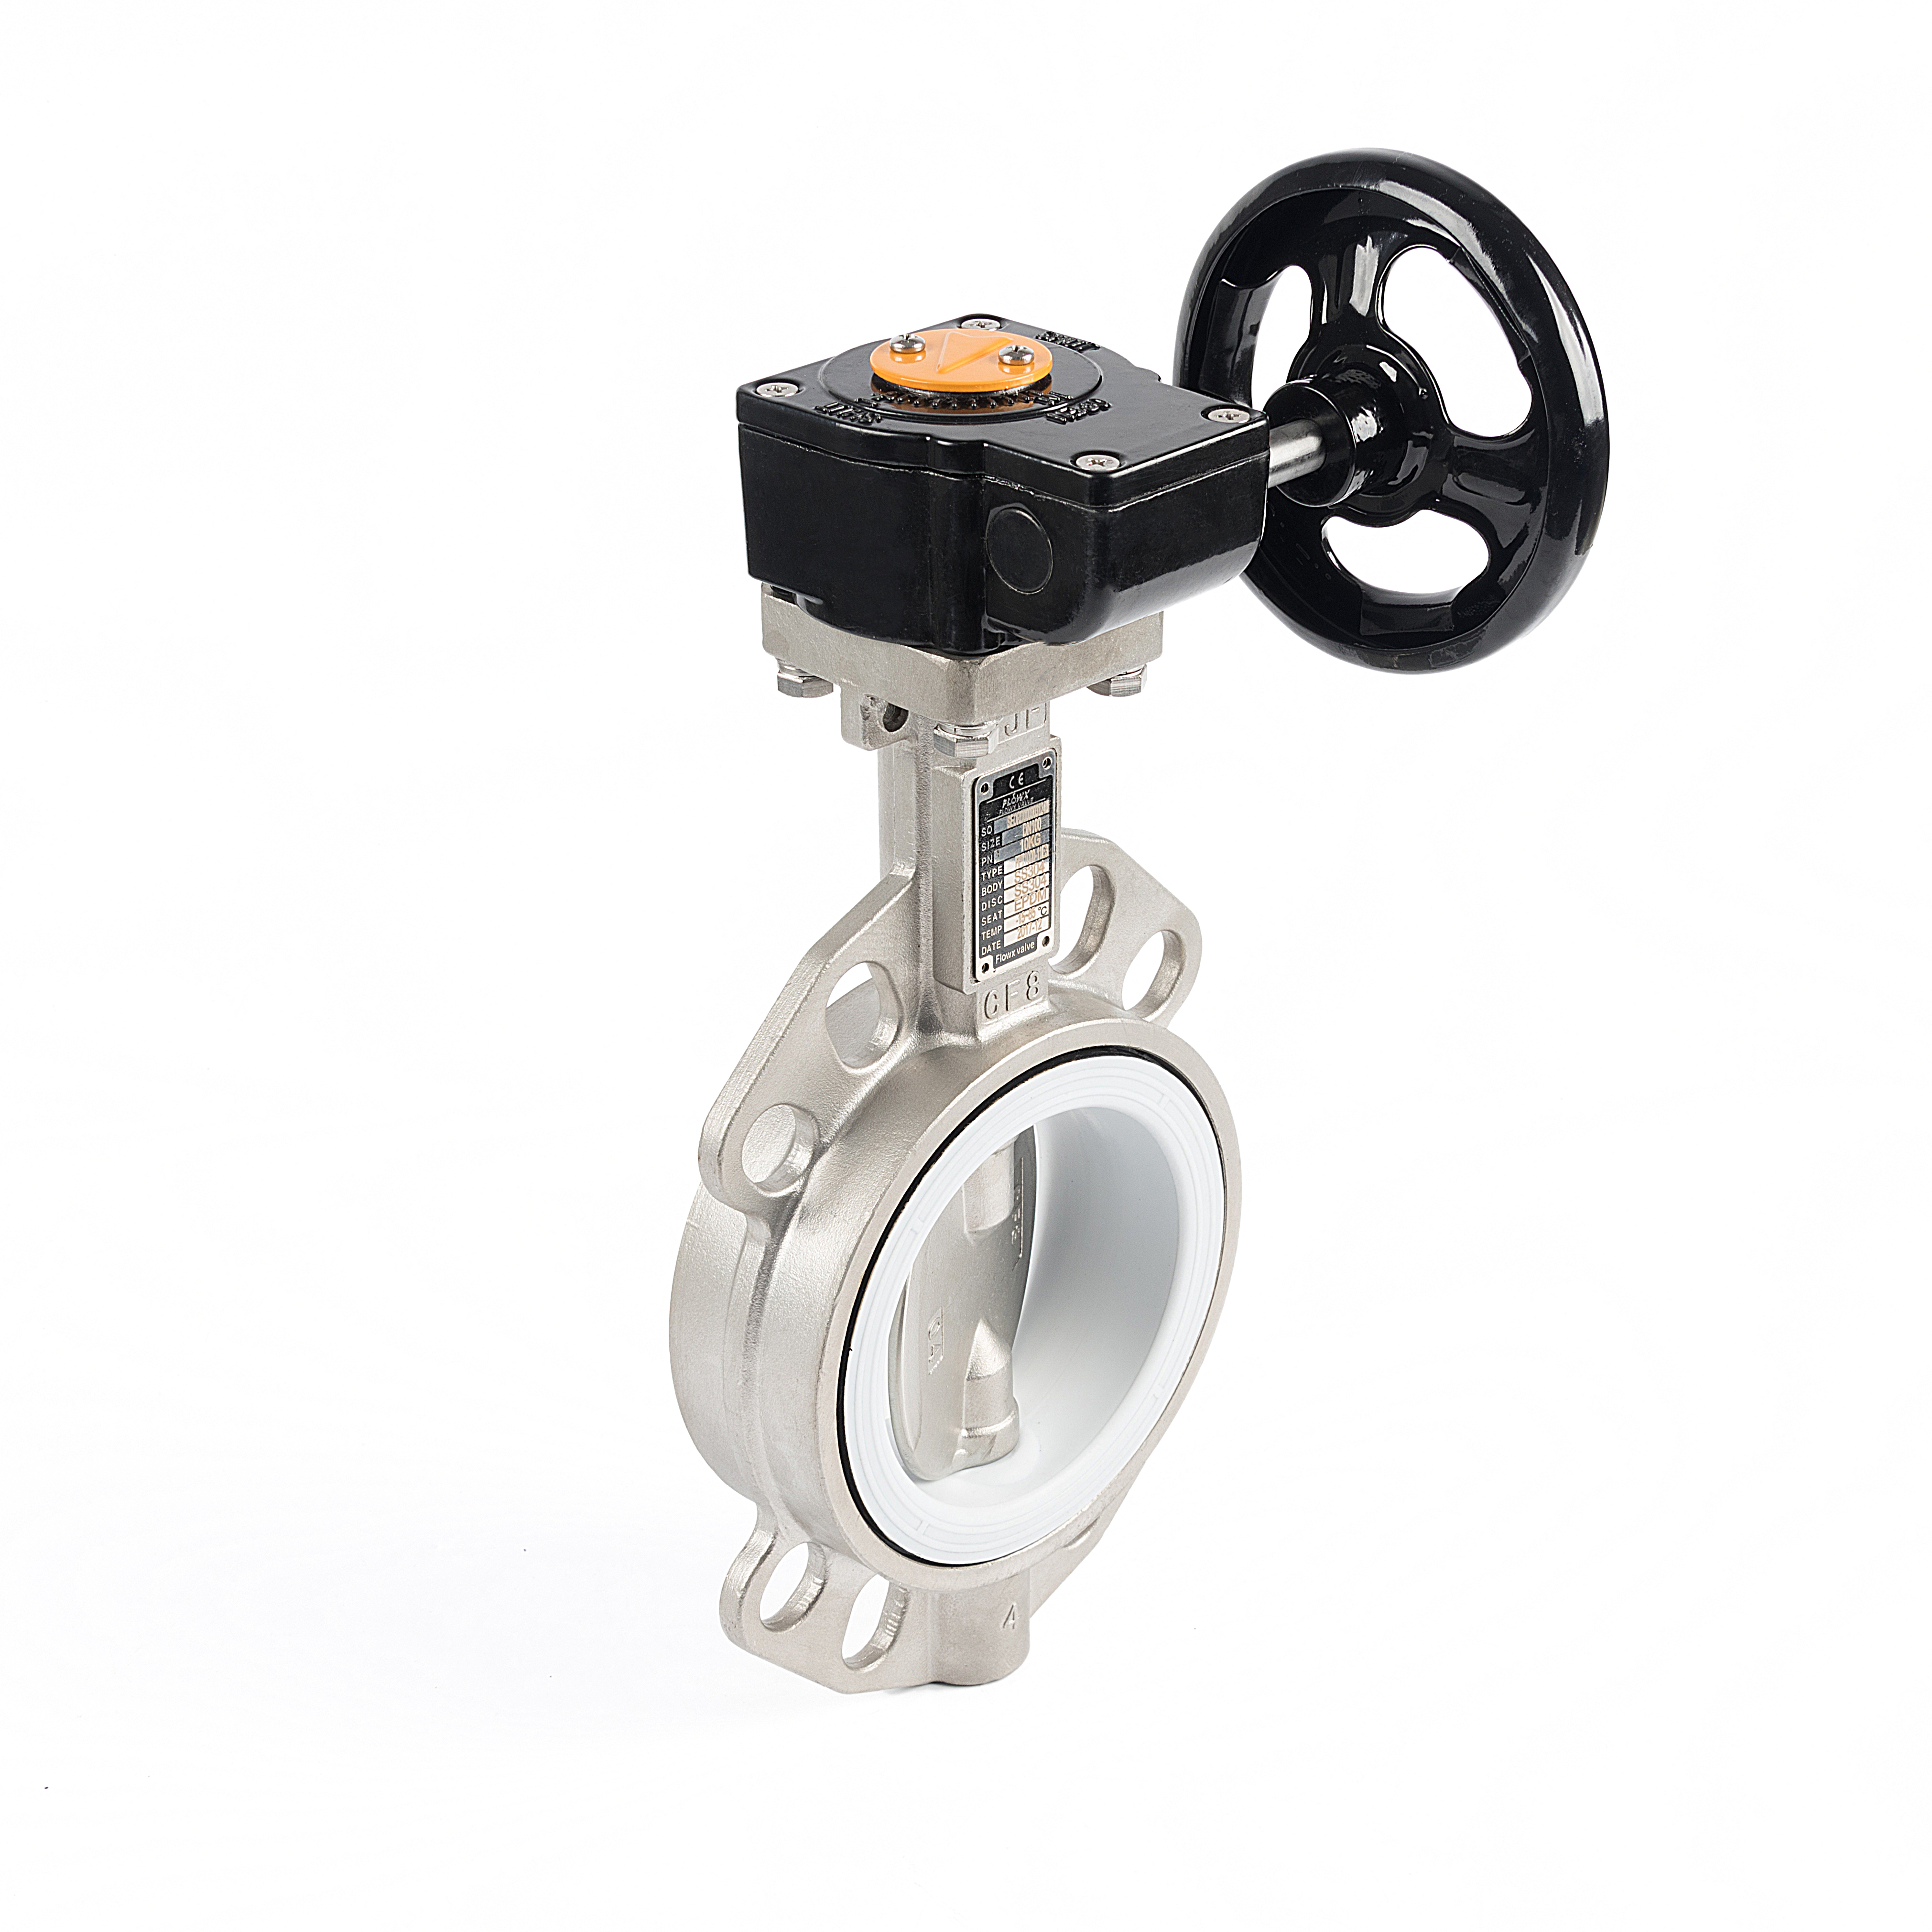 Wafer Type Butterfly Valve Manufacturers in China - Buy Wafer Type